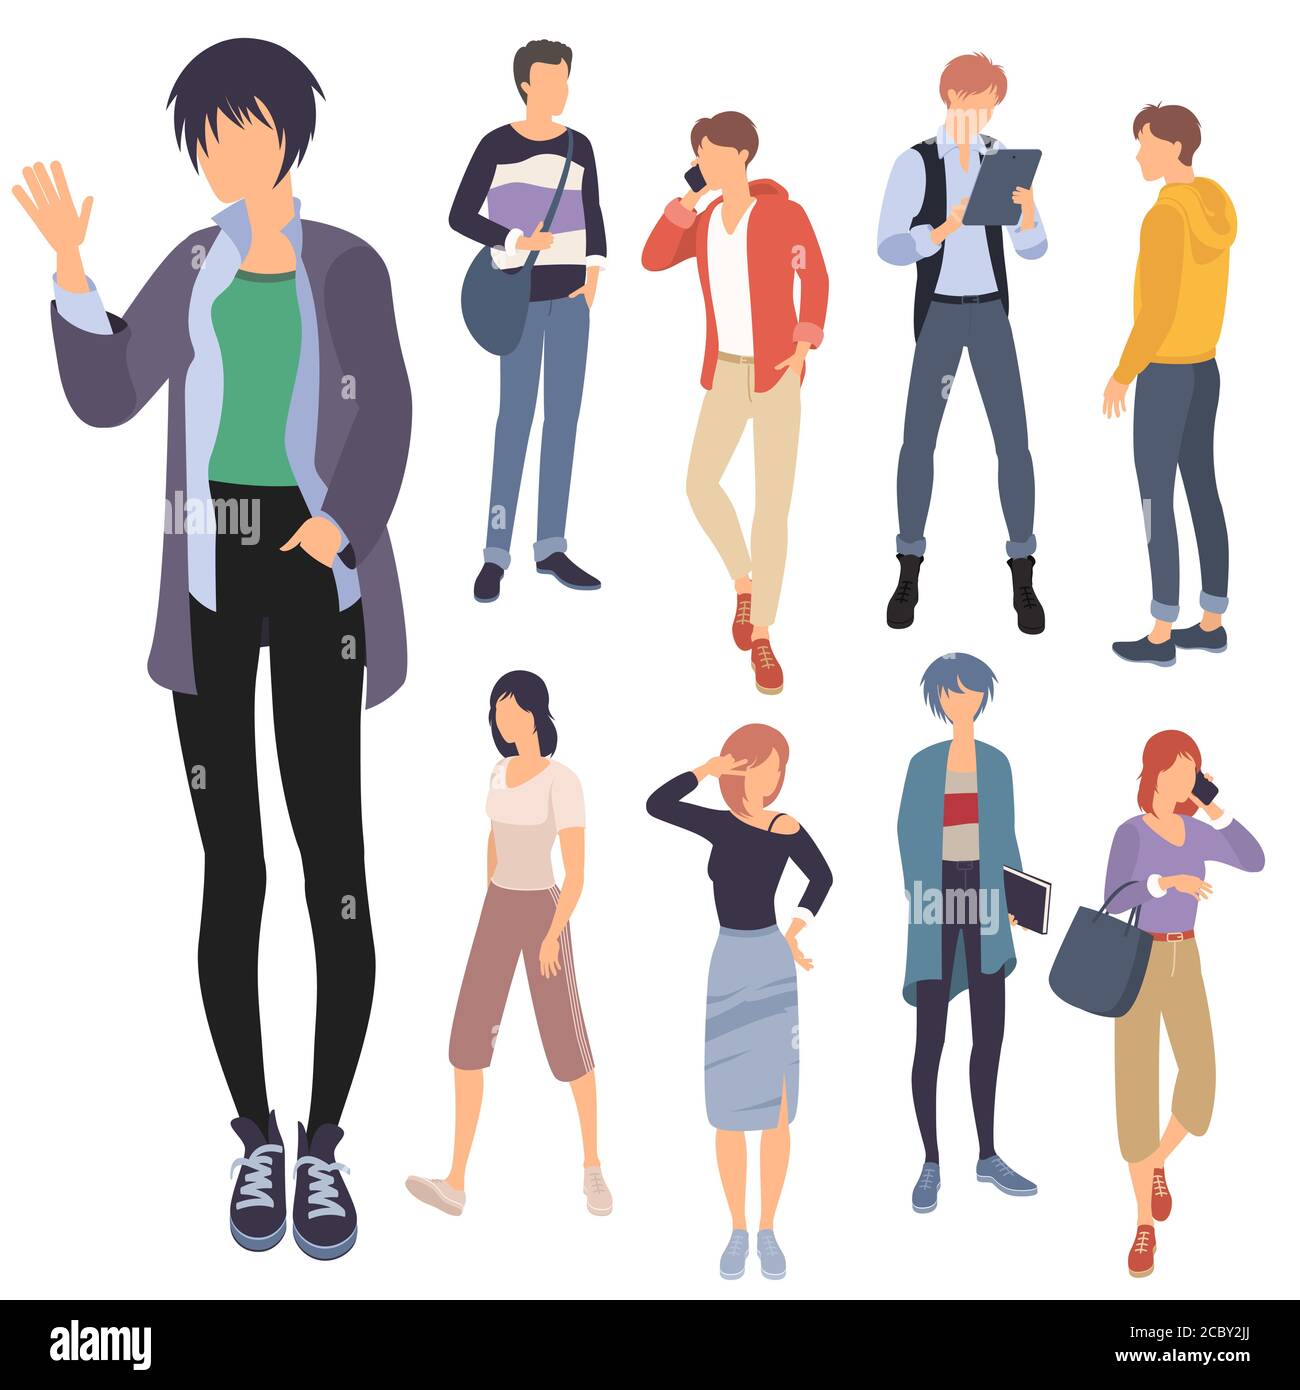 set of people characters Stock Vector